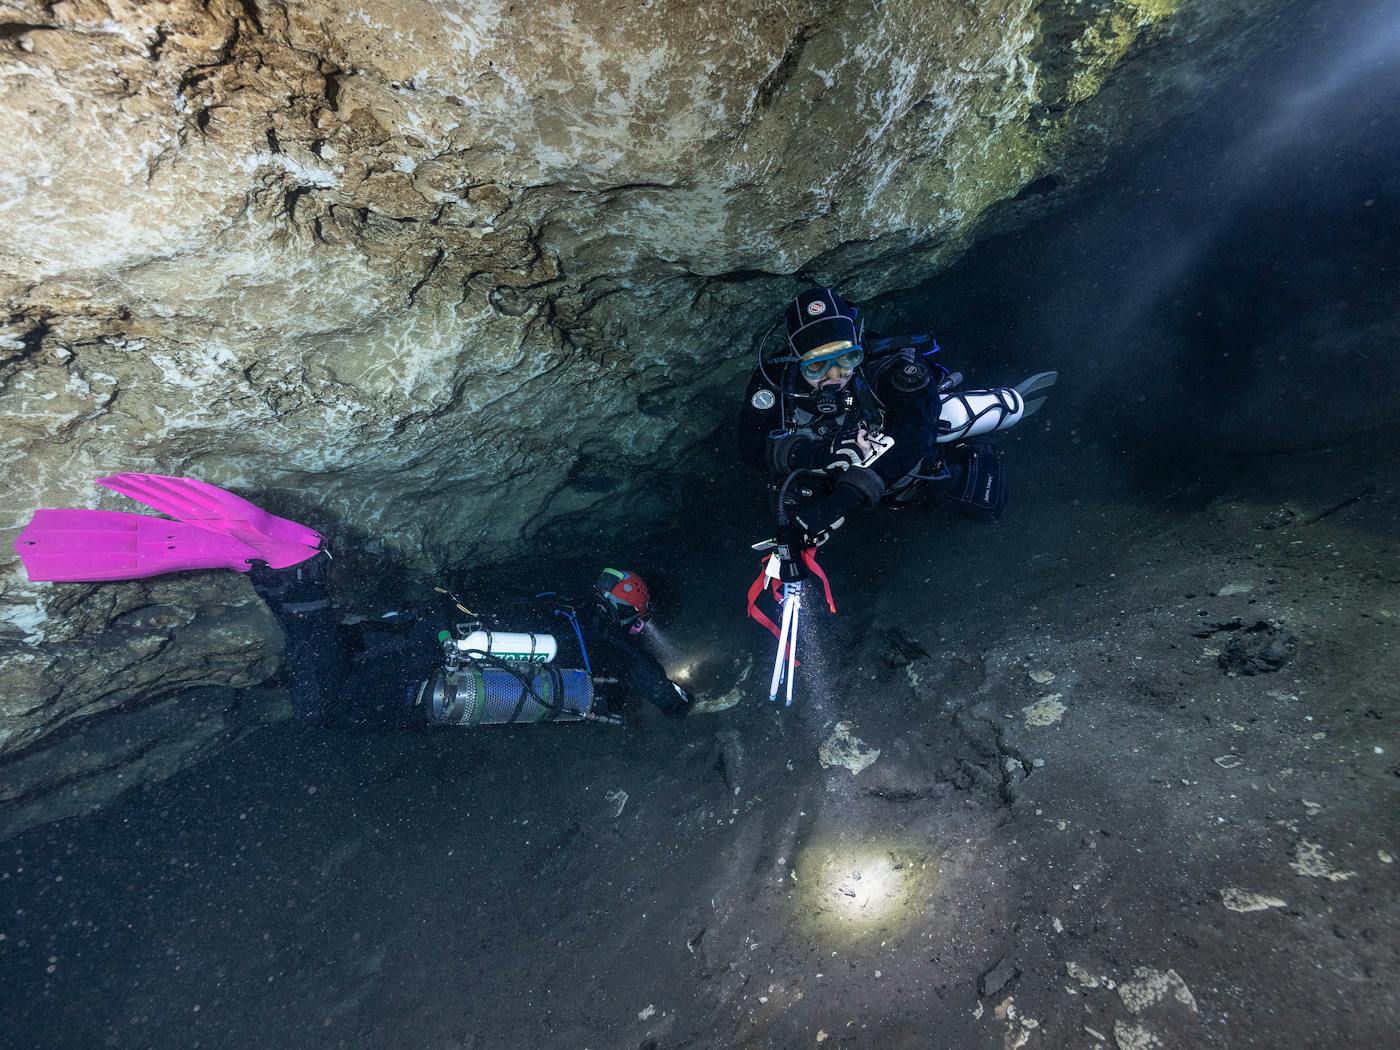 Divers in Fossil Cave searching for fossils